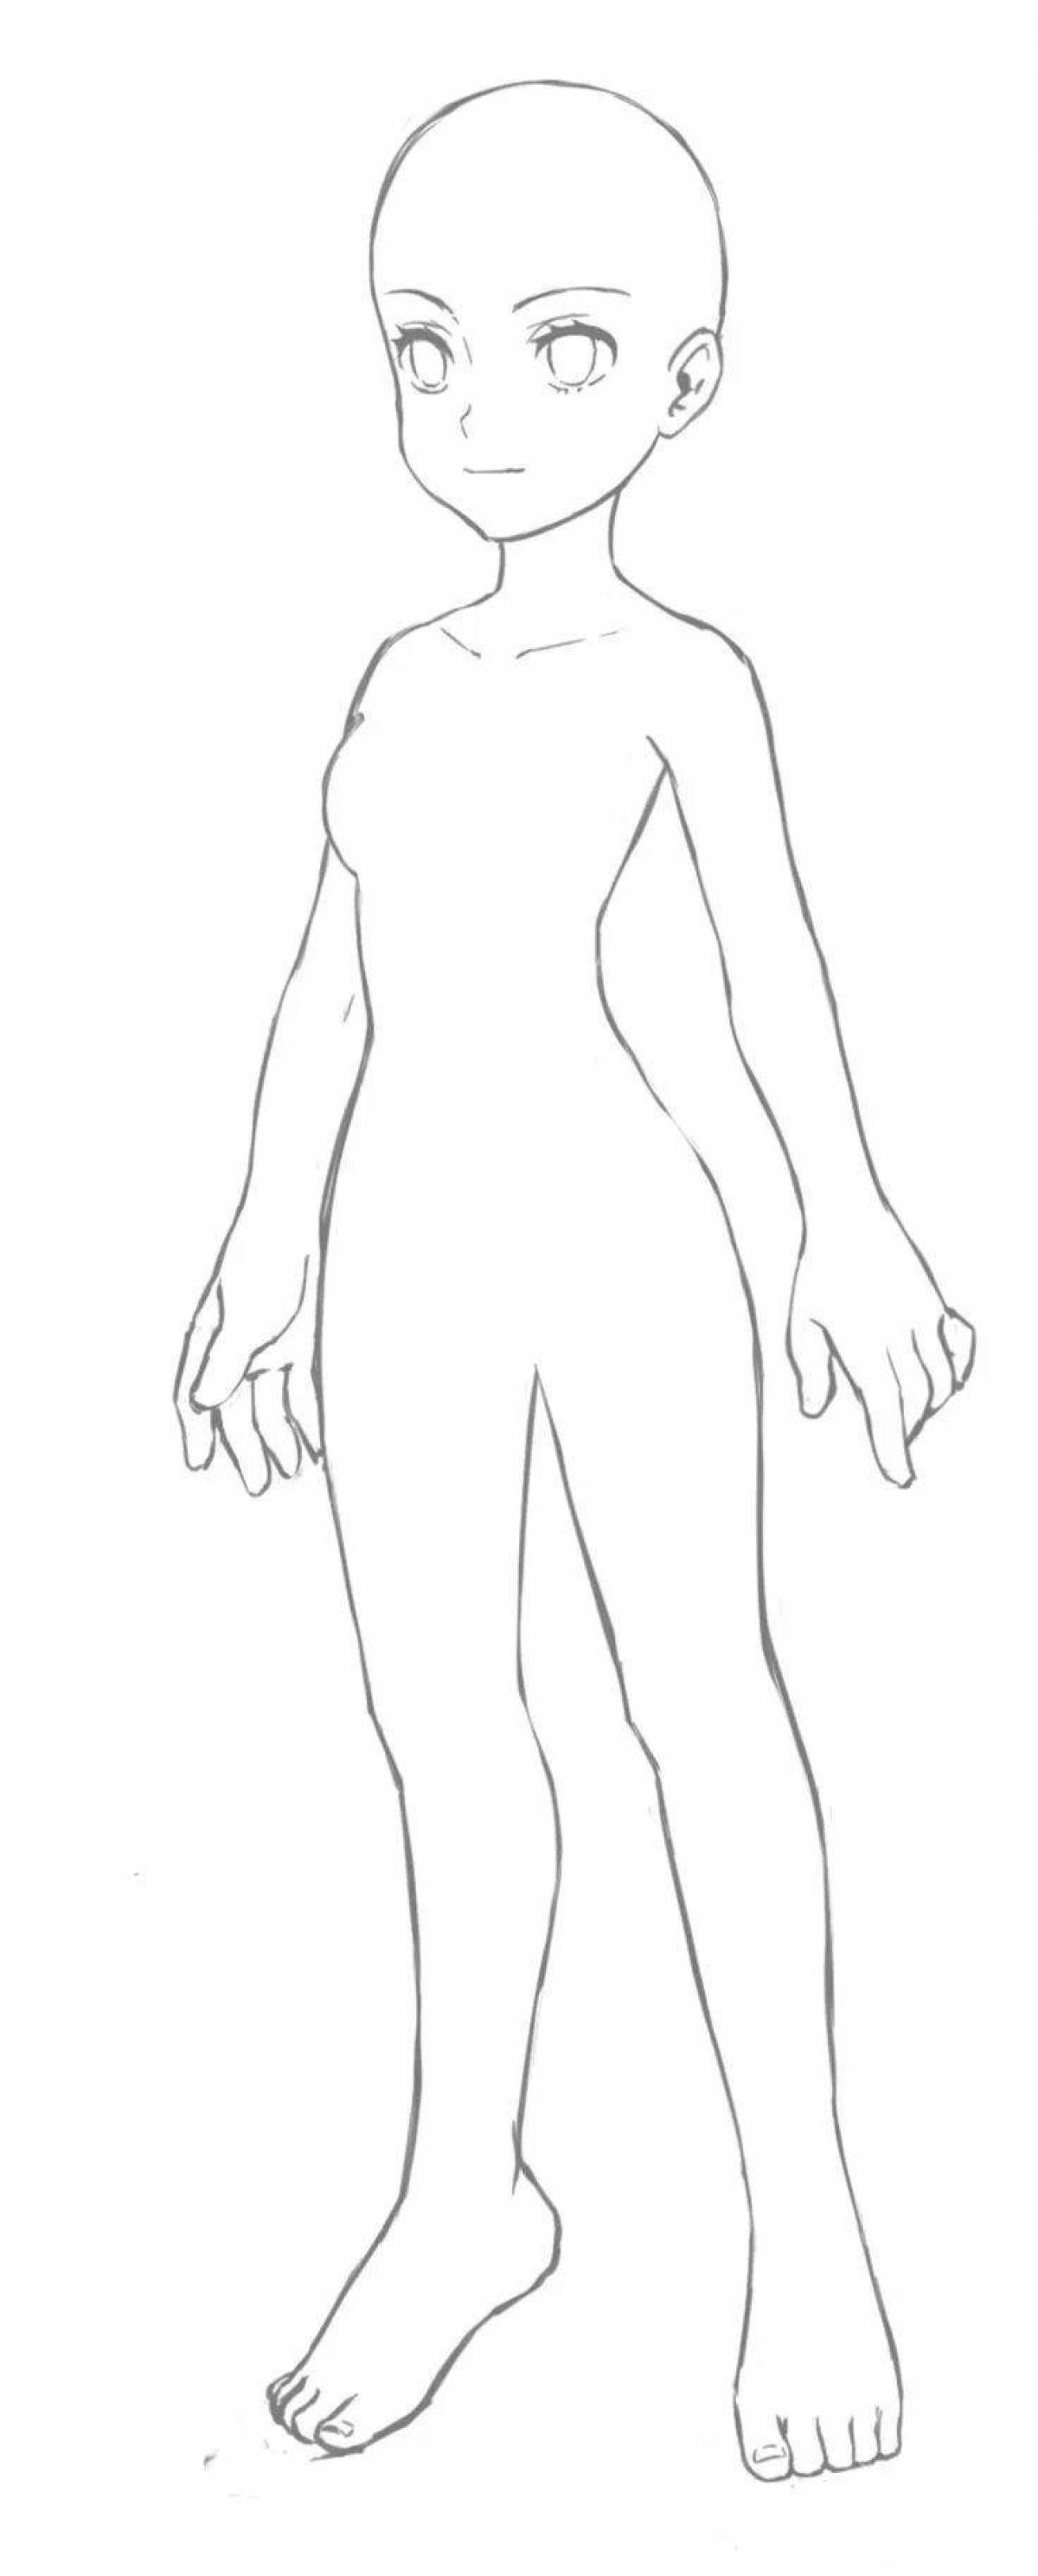 Coloring page of a joyful female mannequin